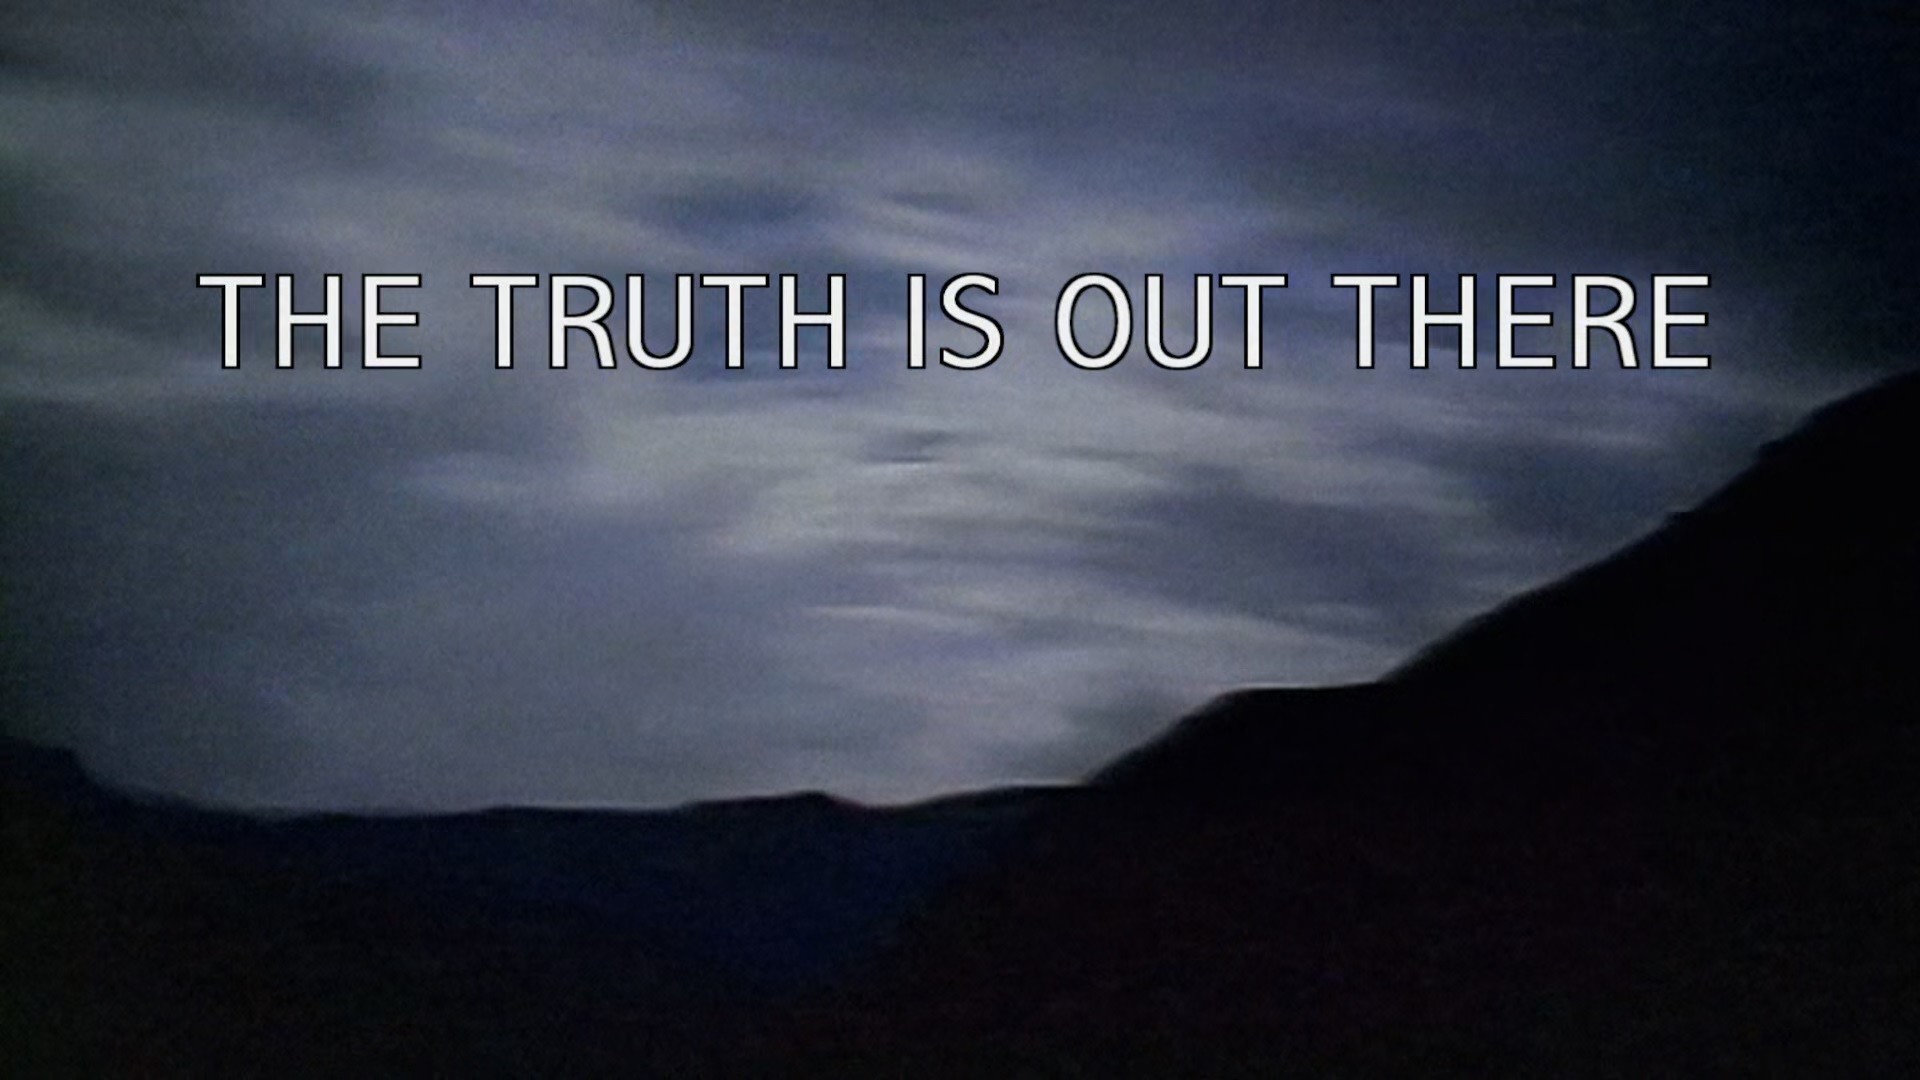 The Most Commonly Used Tagline Of The X Files Episodes - Darkness -  1920x1080 Wallpaper 